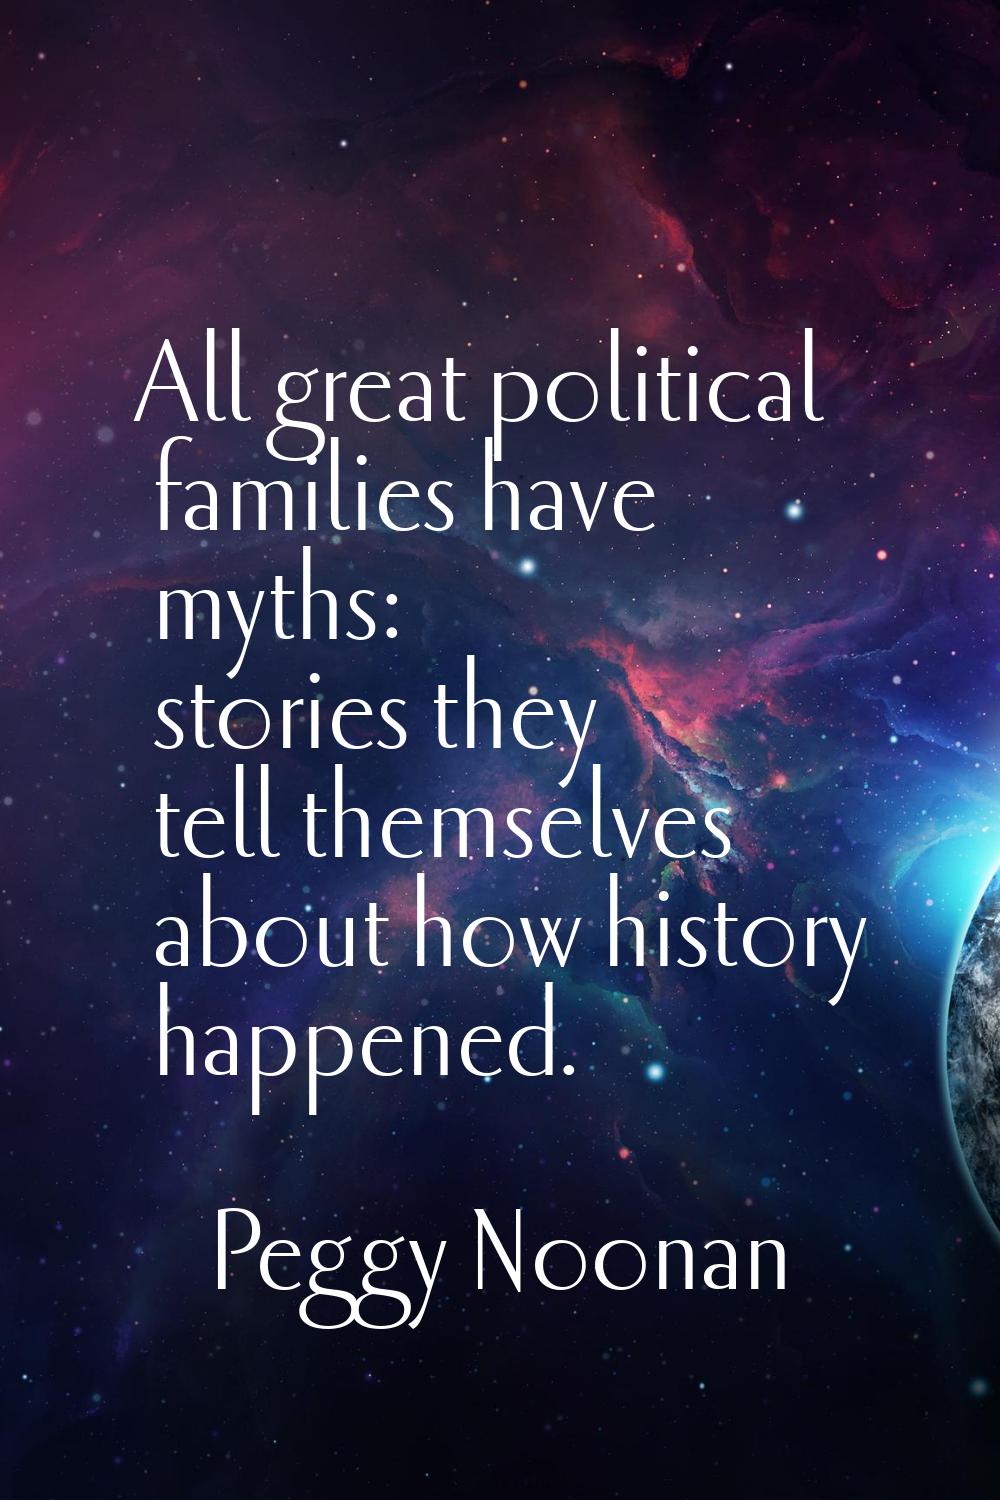 All great political families have myths: stories they tell themselves about how history happened.